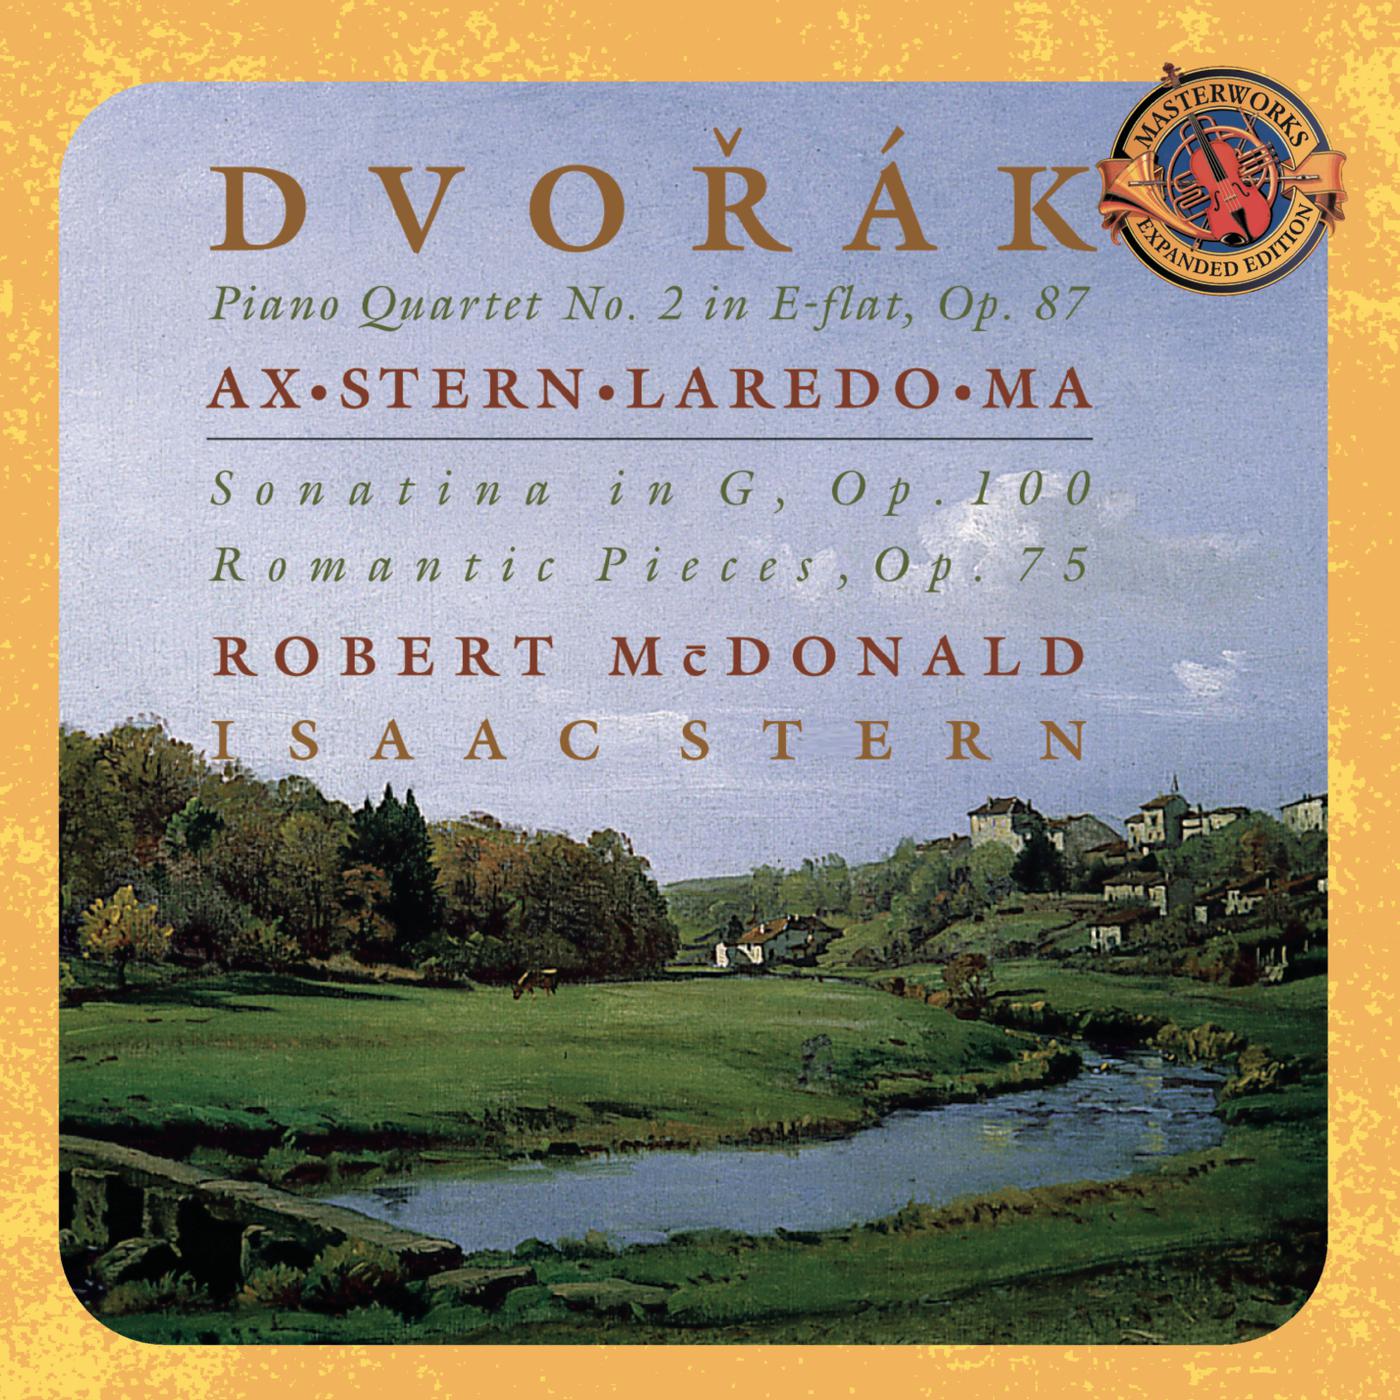 Dvora k: Piano Quartet No. 2 in Eflat Major, Op. 87 Sonatina in G, Op. 100 Romatic Pieces, Op. 75  Expanded Edition